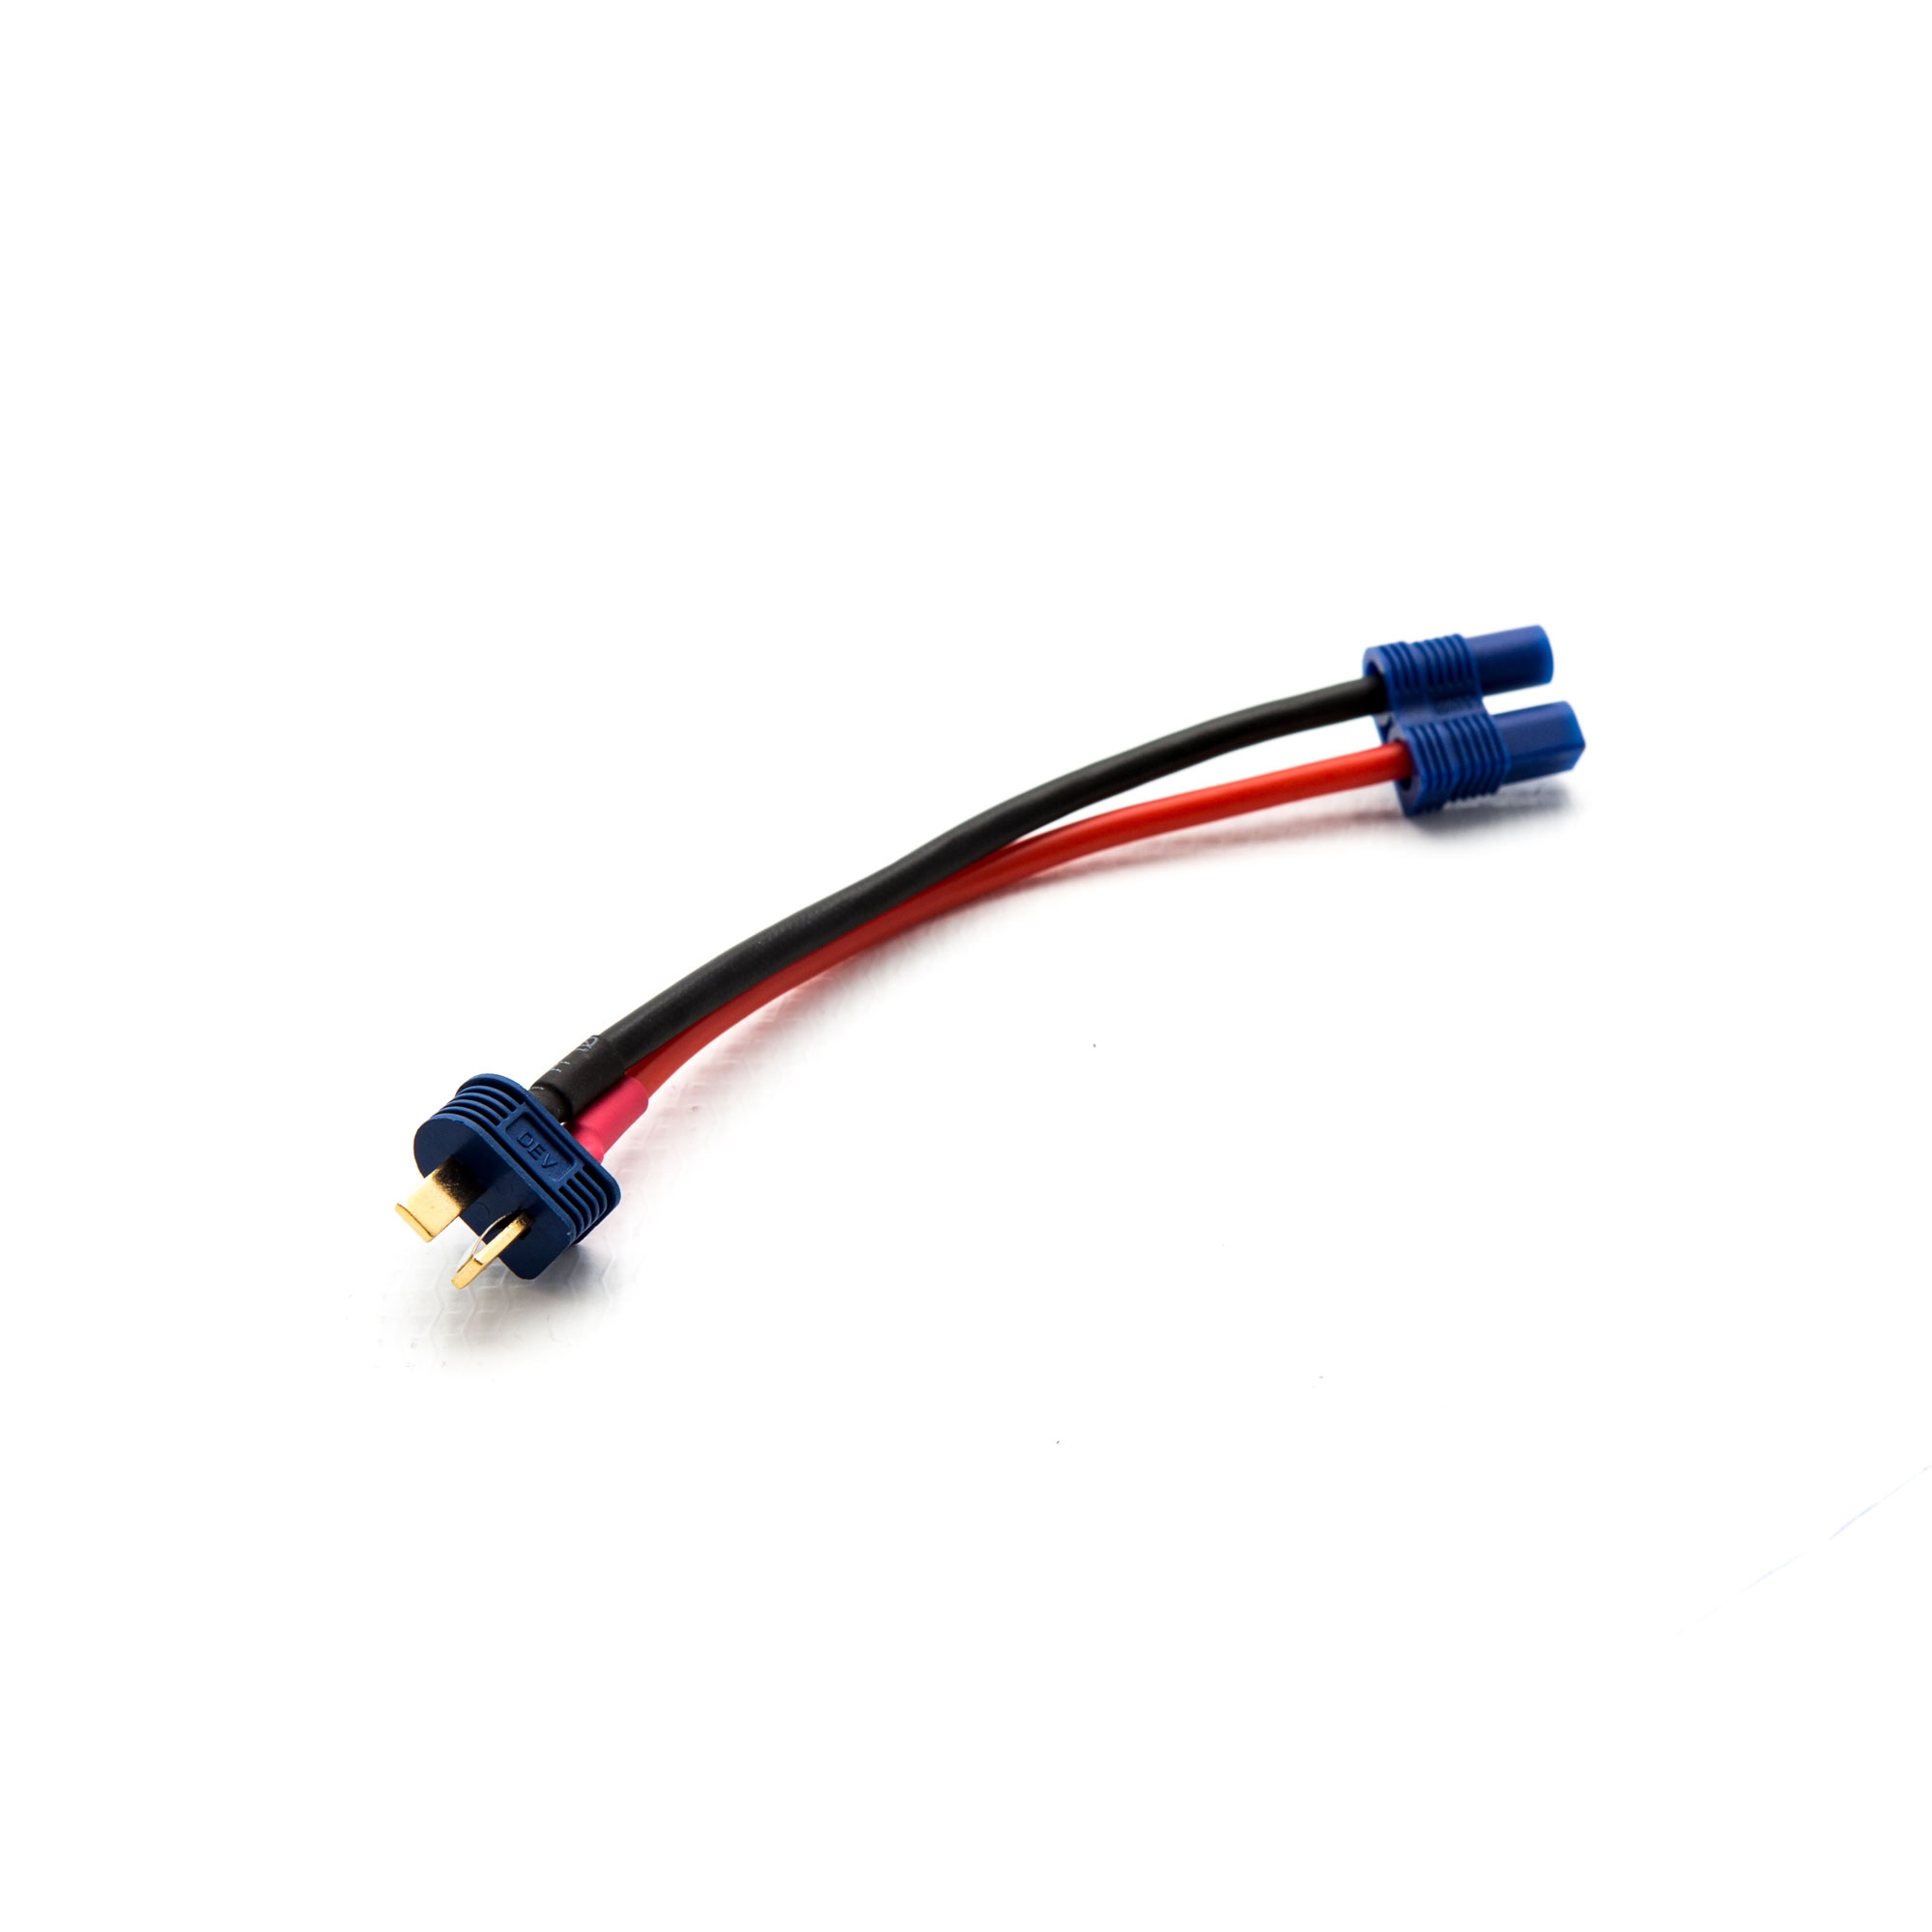 C0025 RC Compatible Male T-Plug to Female EC3 Adaptor Adapter 